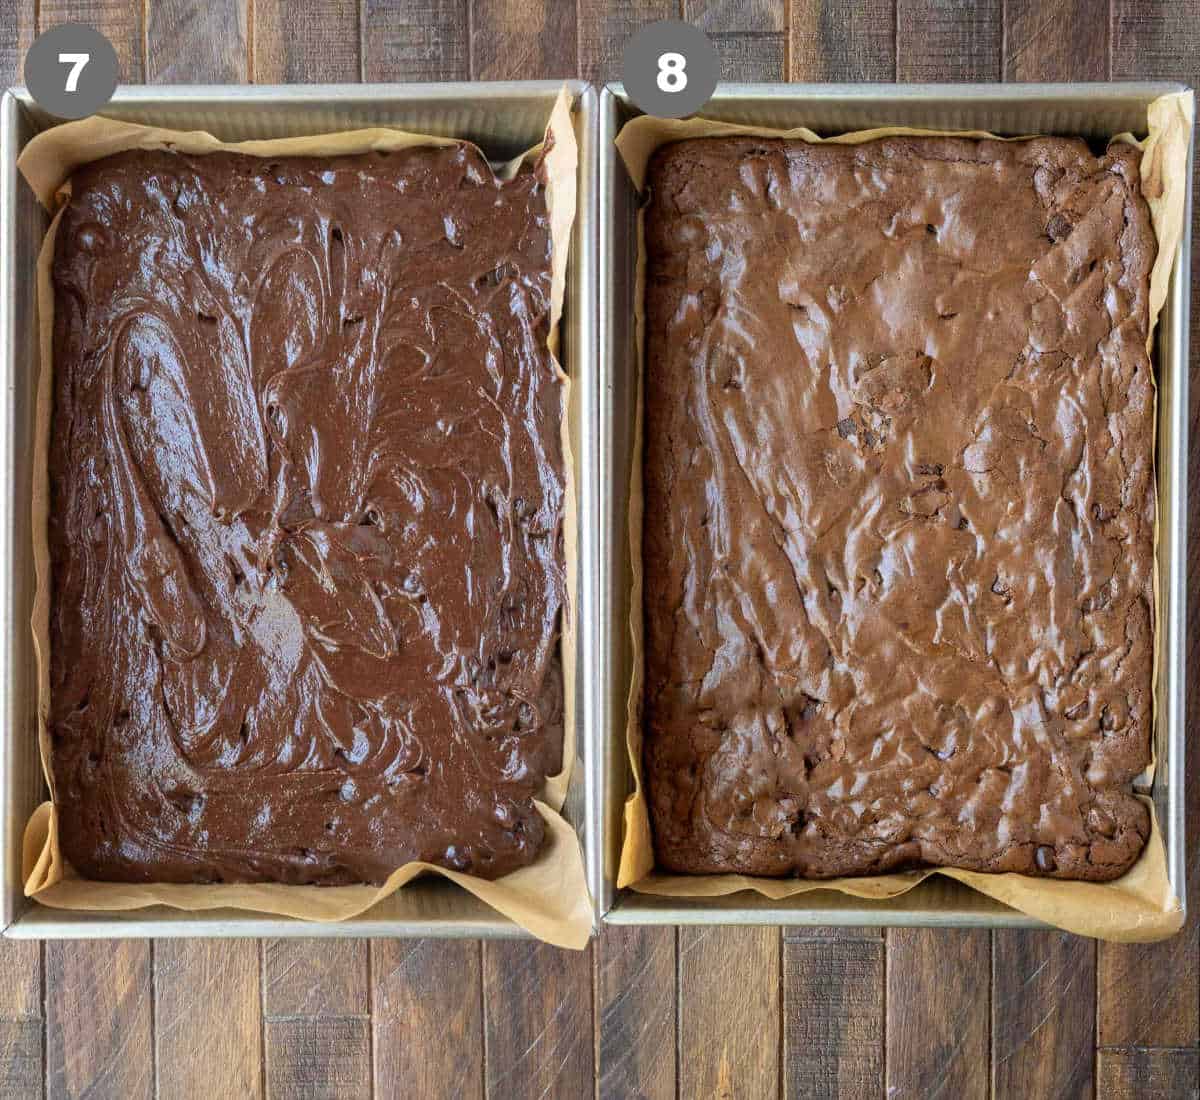 Brownies spread in a baking dish and then baked.